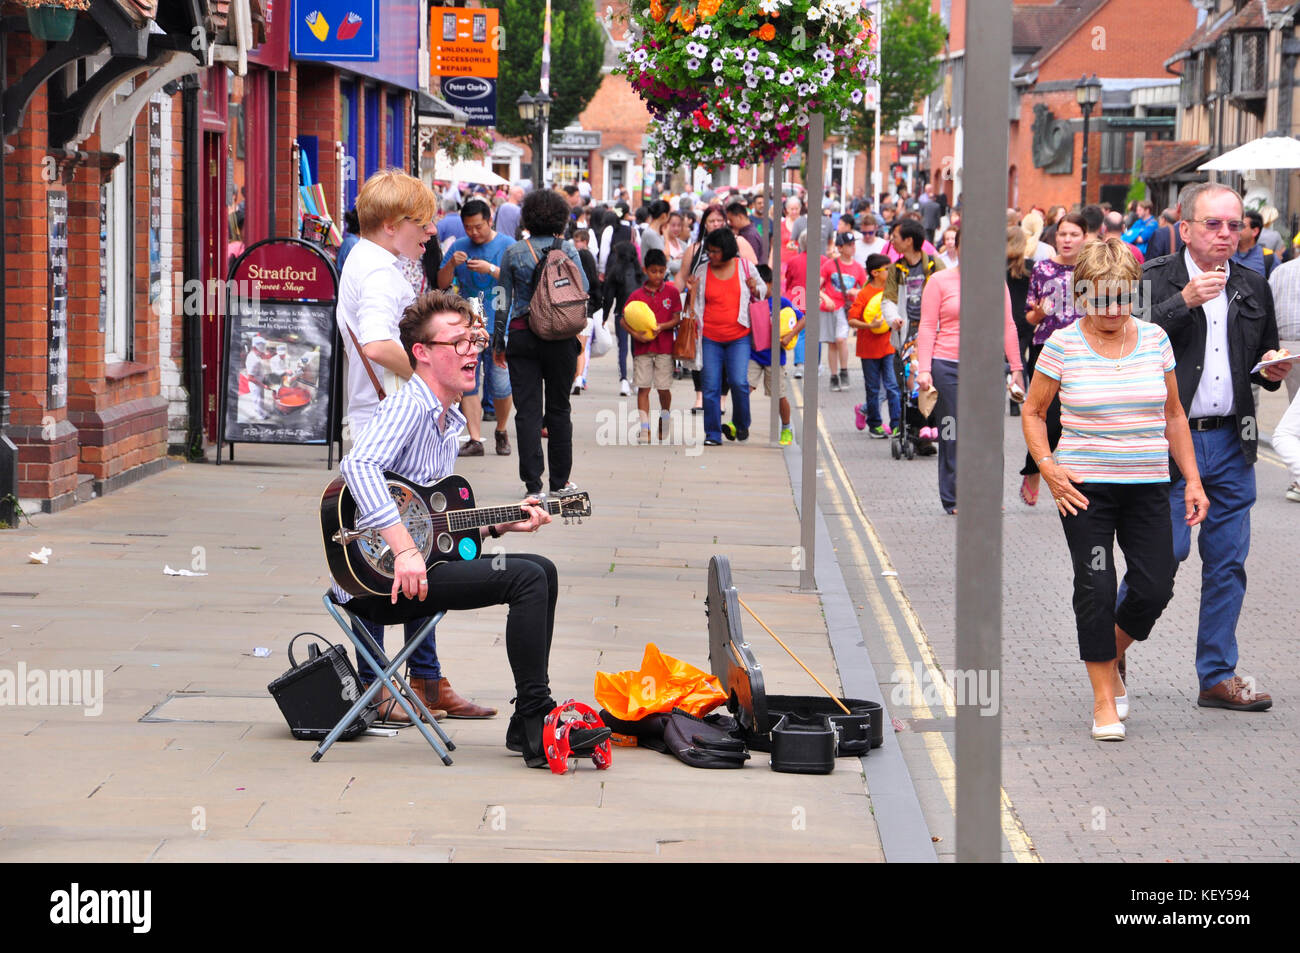 Young buskers  entertaining the tourists with Beatles songs in  Stratford on Avon, Warwickshire.UK Stock Photo